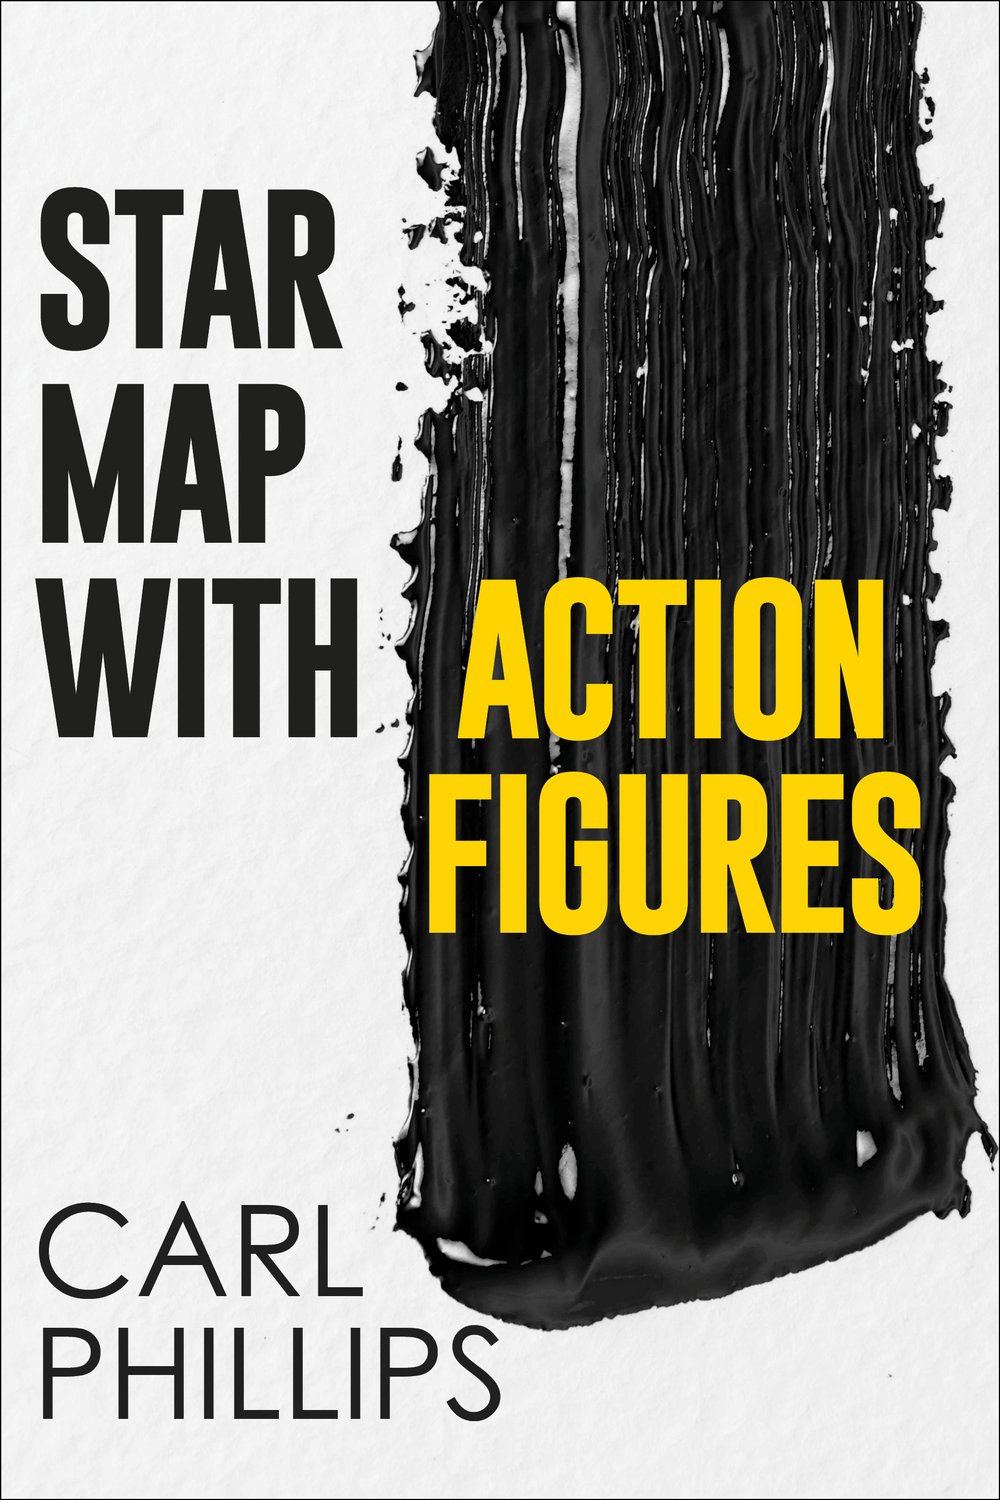 Star Map with Action Figures by Carl Phillips